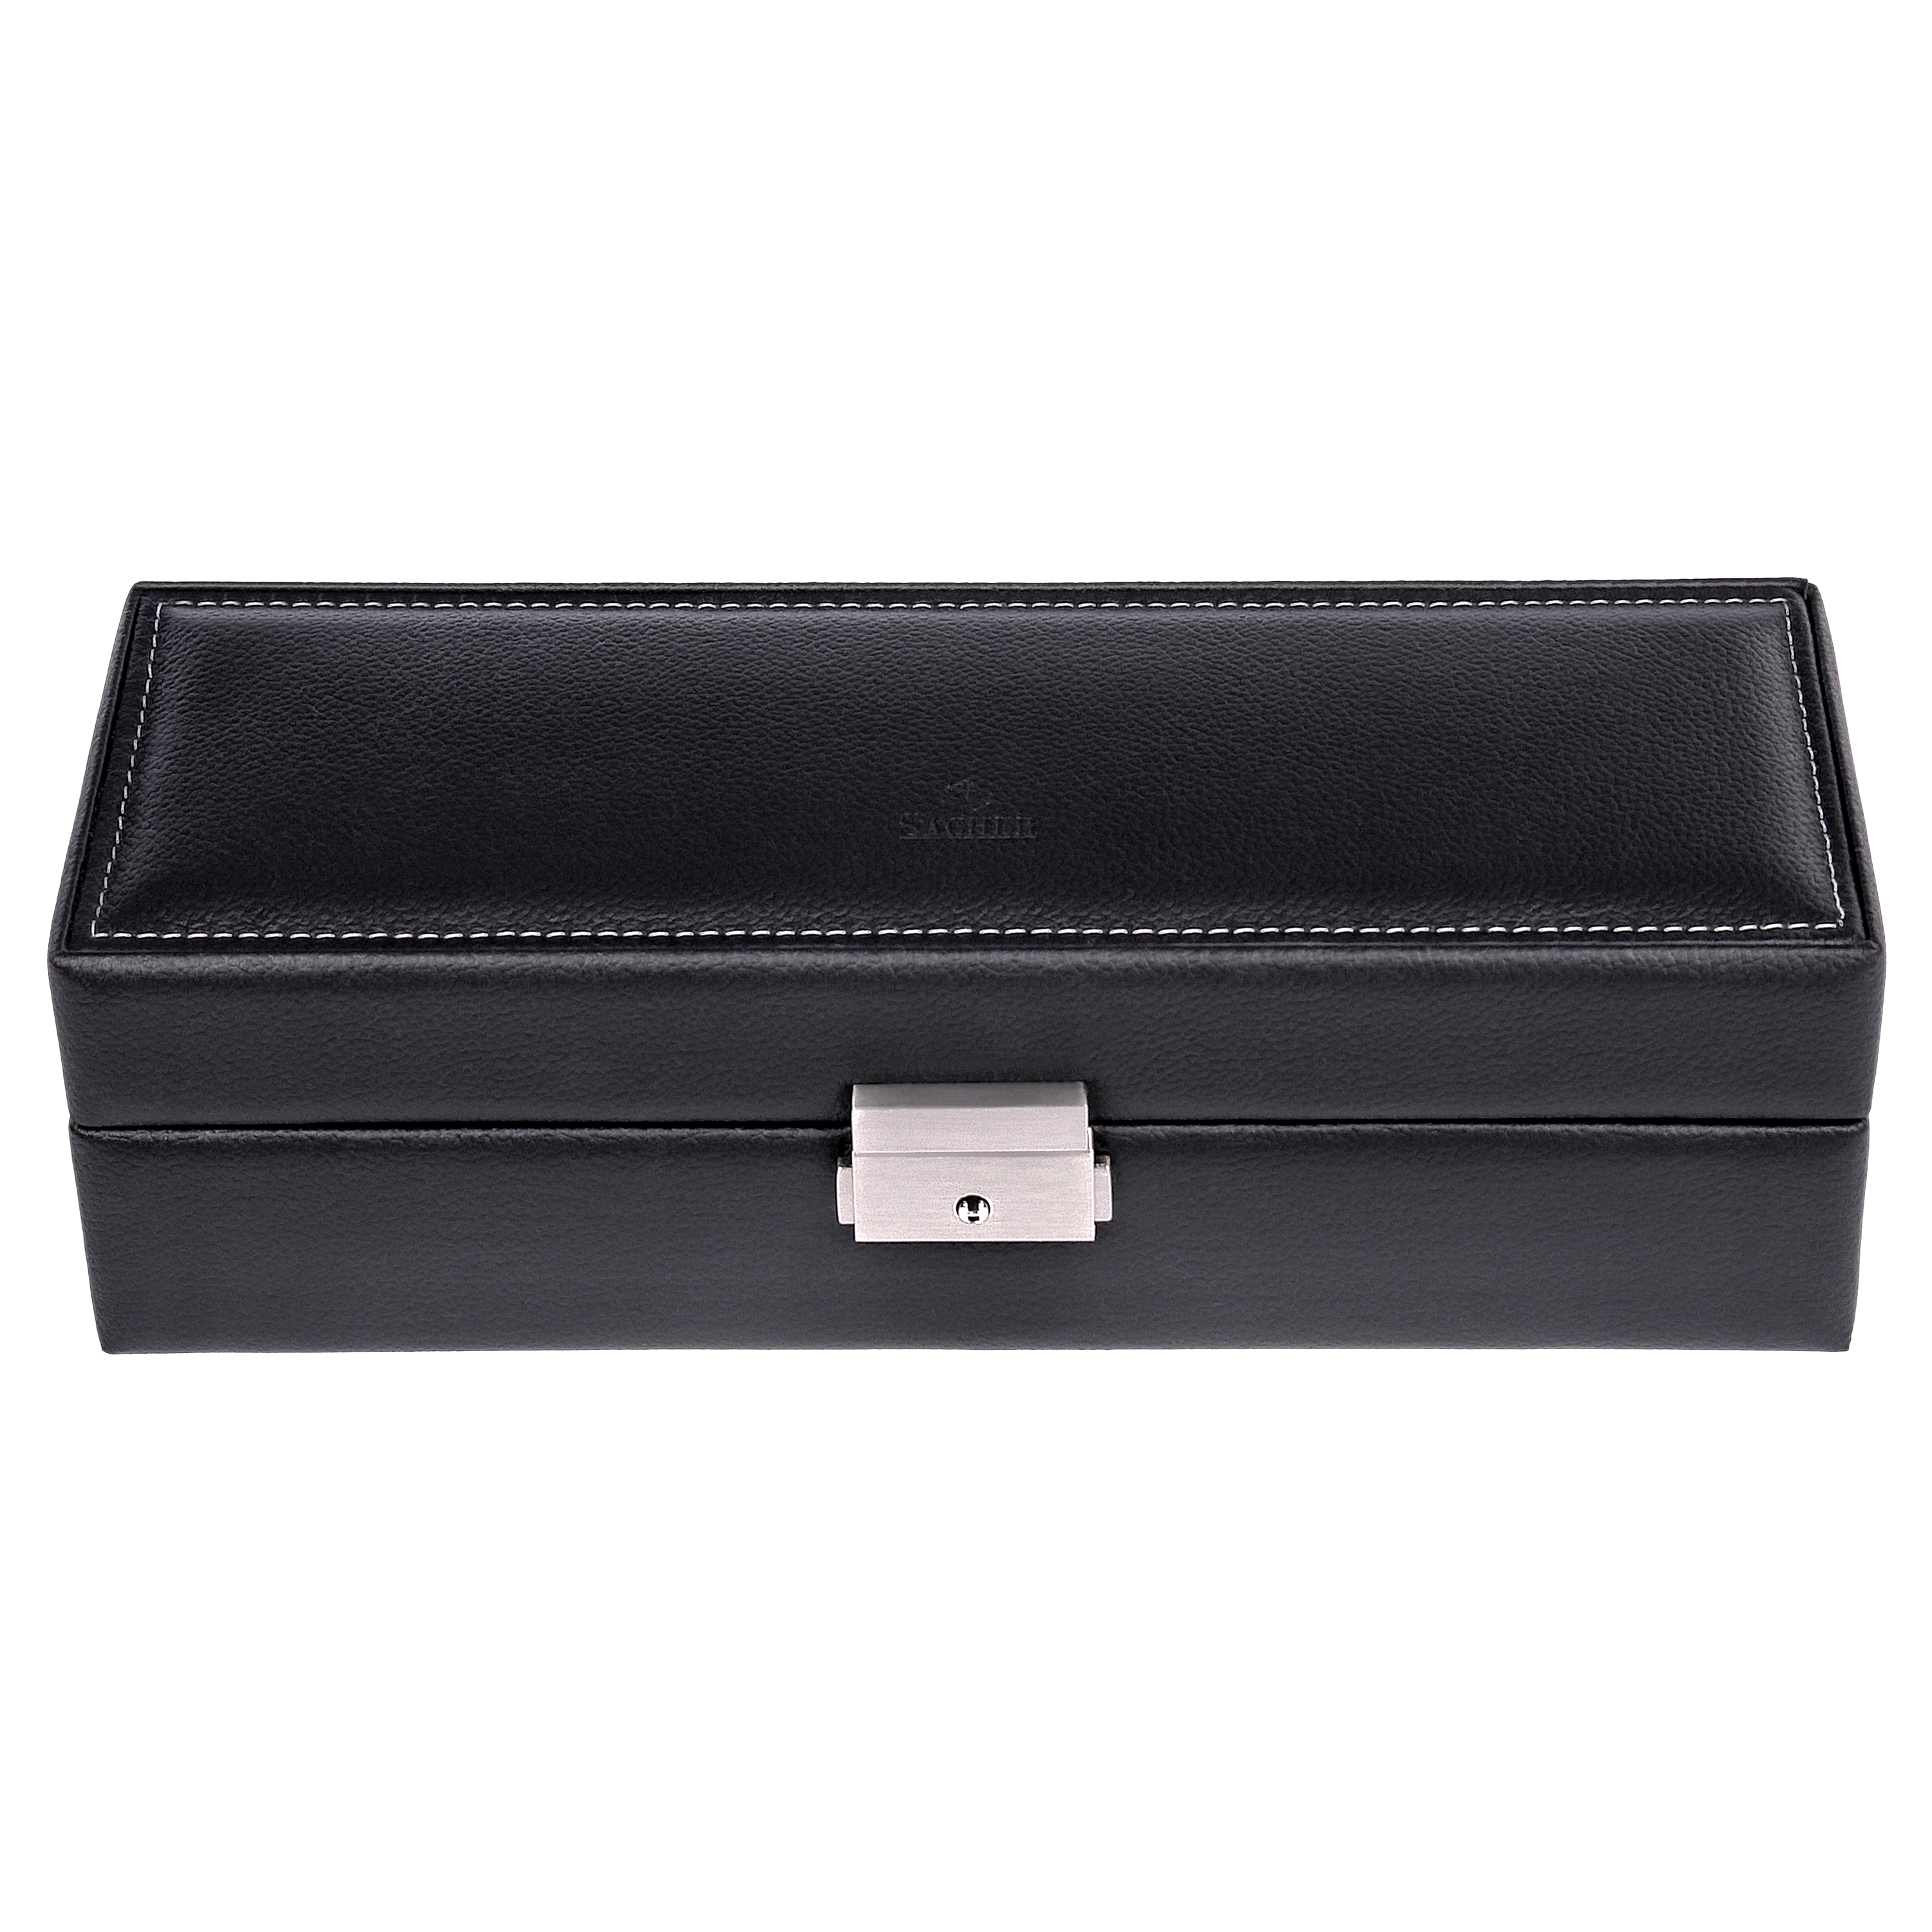 Watch case for 5 watches tamigi sport / black (leather) 